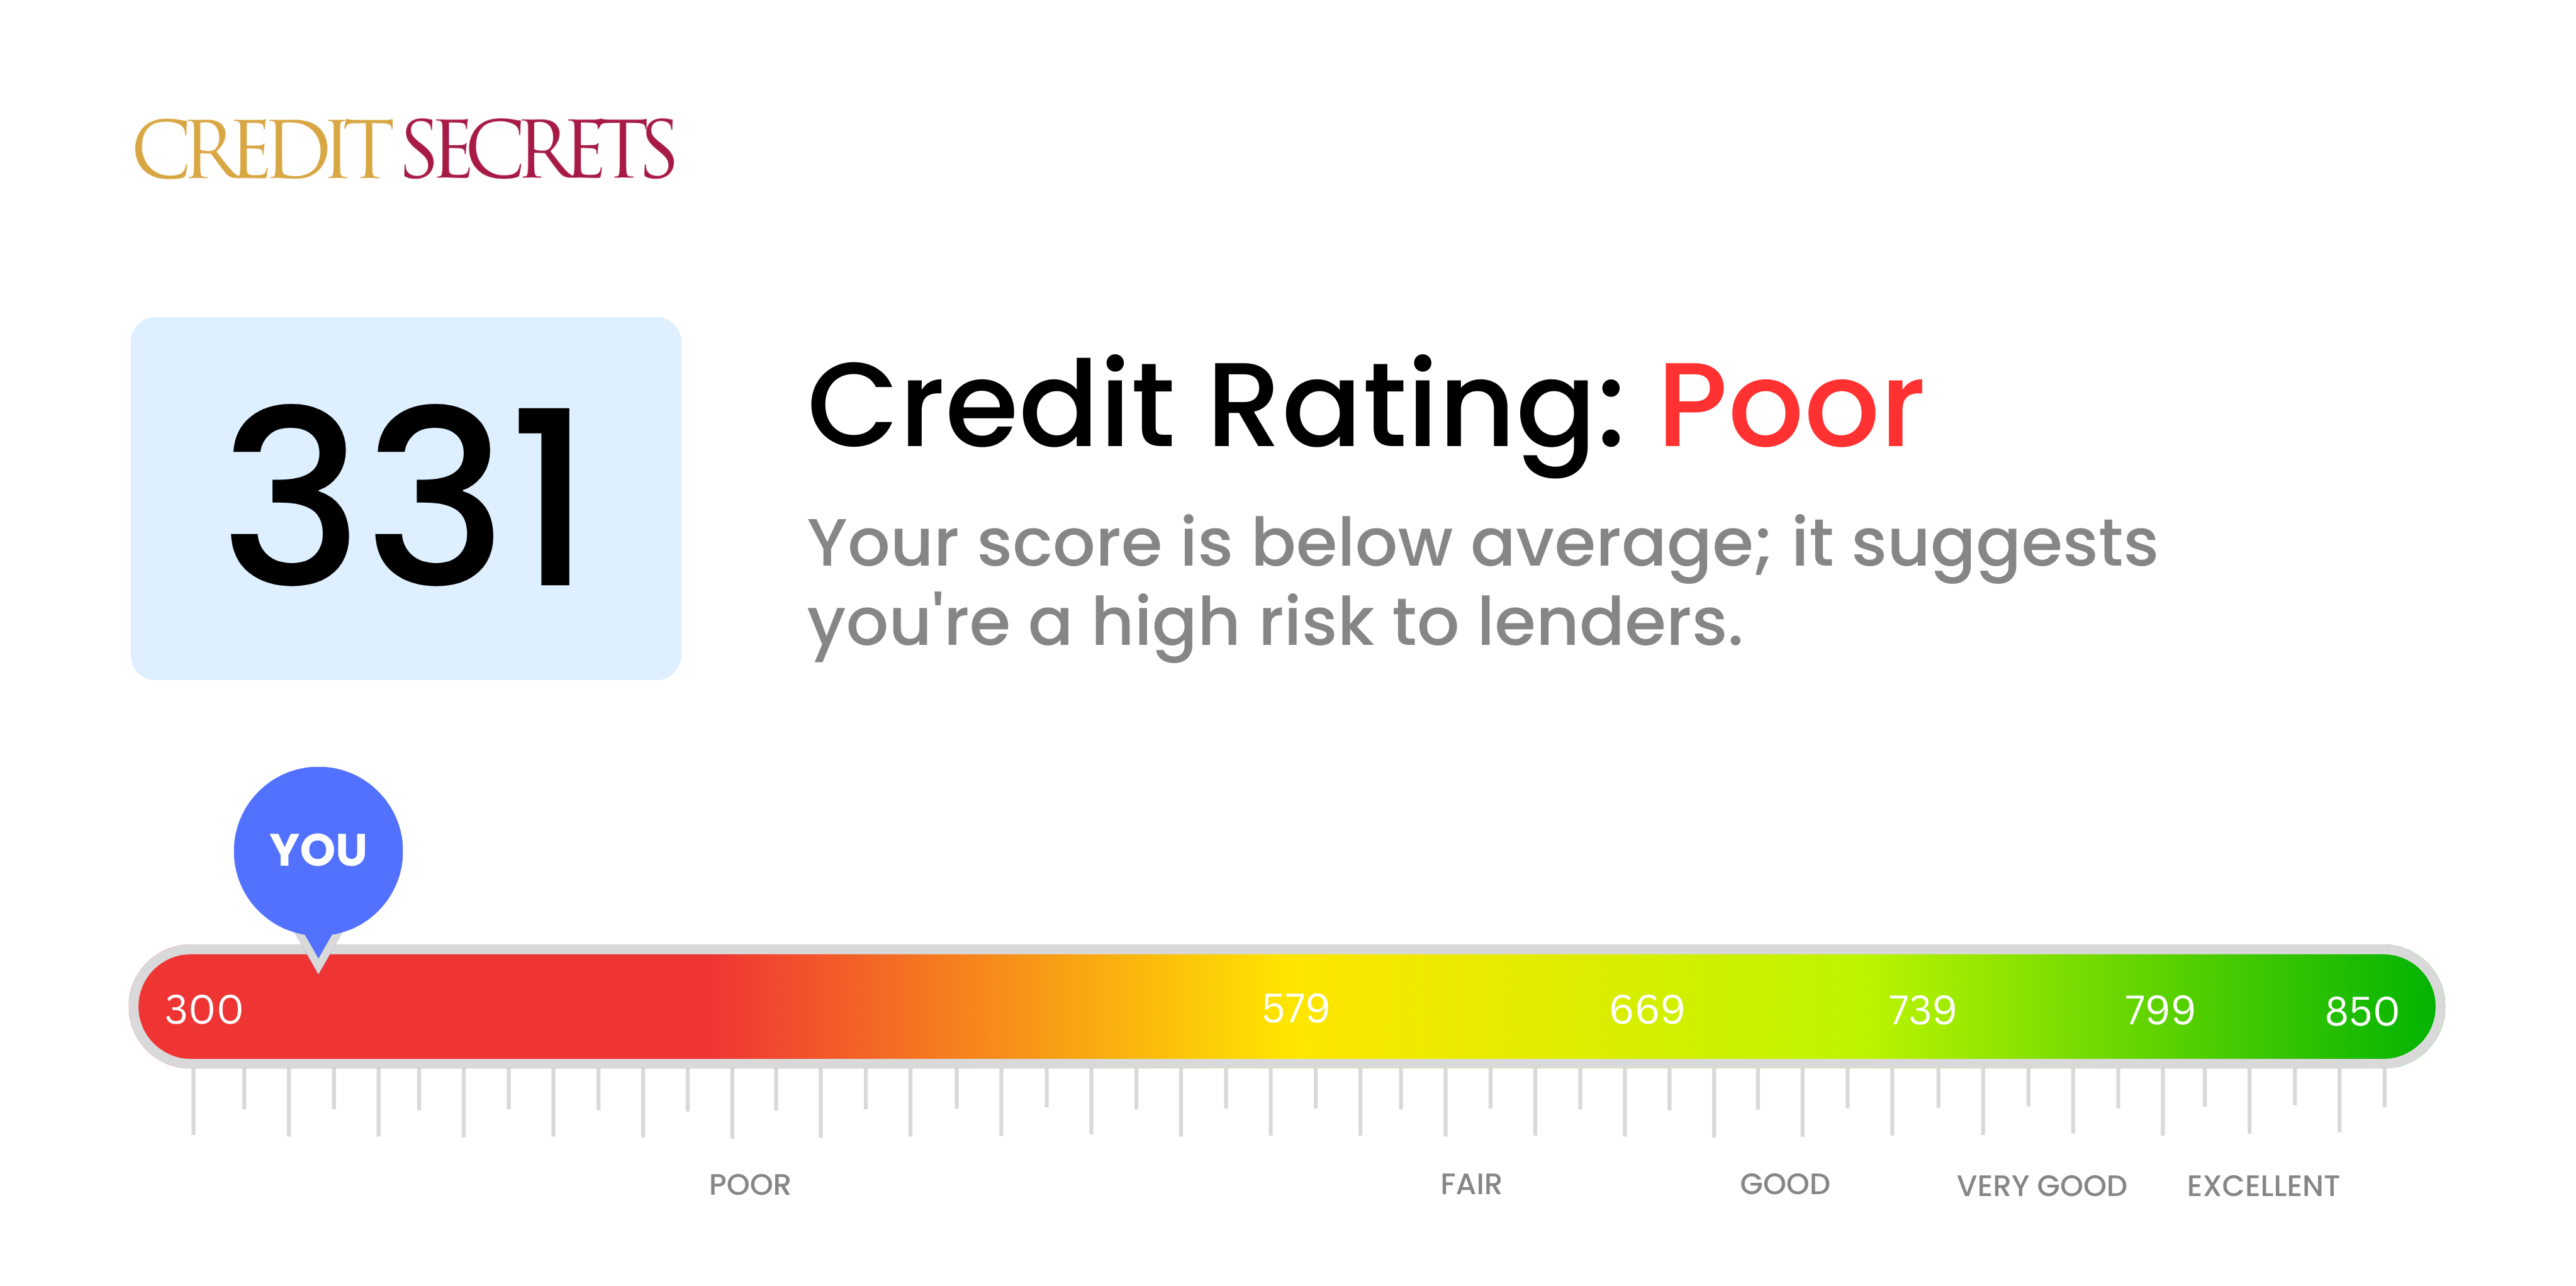 Is 331 a good credit score?